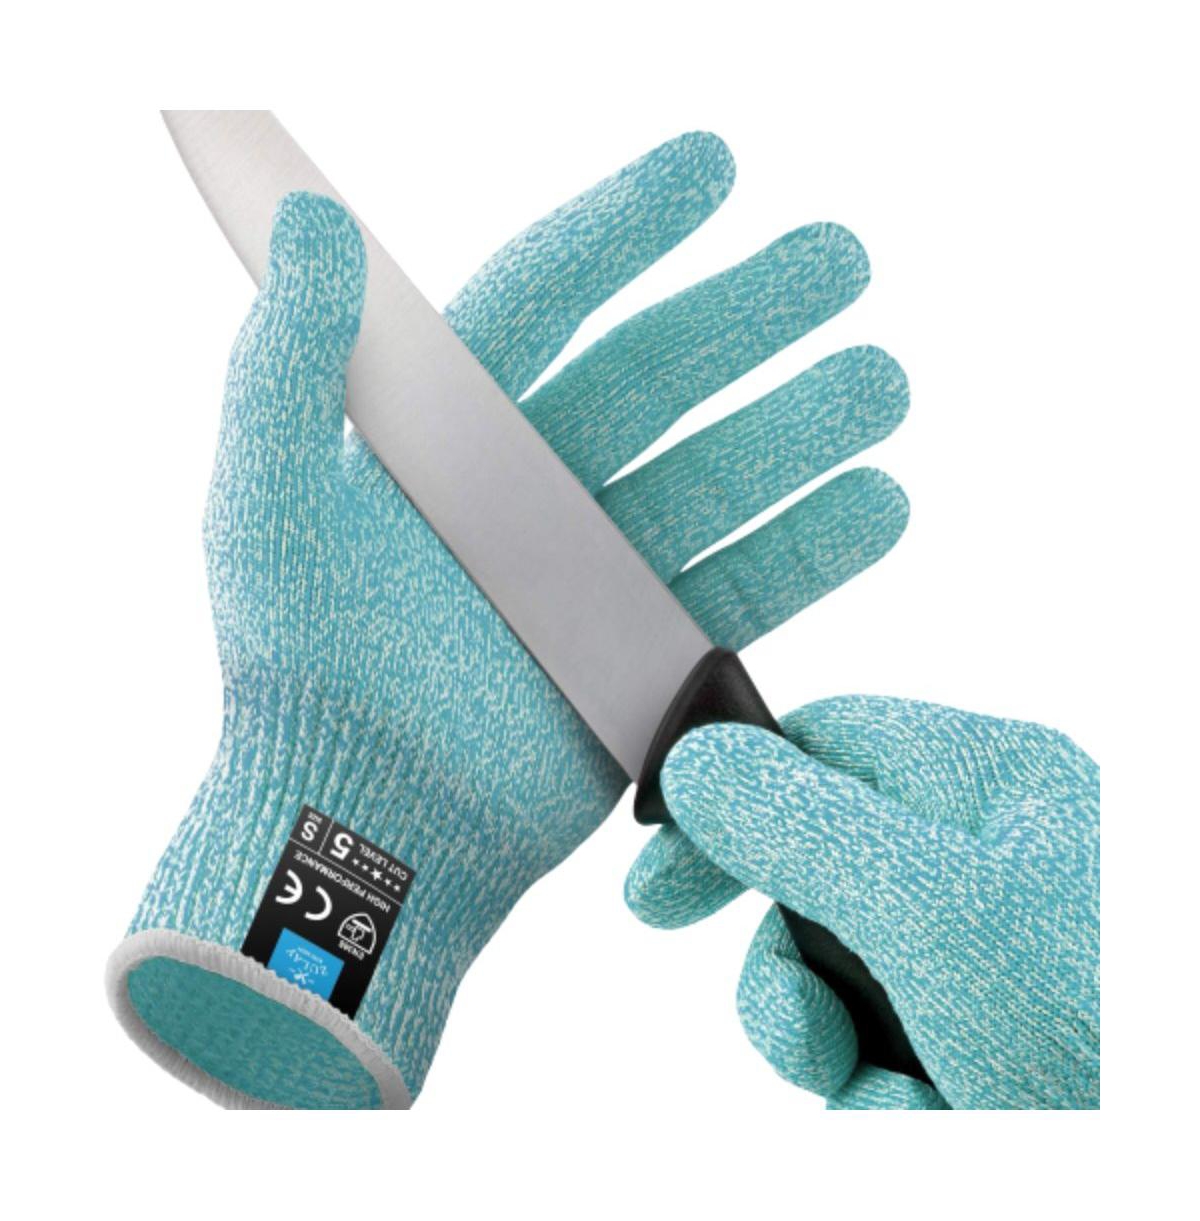 ZULAY KITCHEN CUT RESISTANT GLOVES FOOD GRADE LEVEL 5 PROTECTION